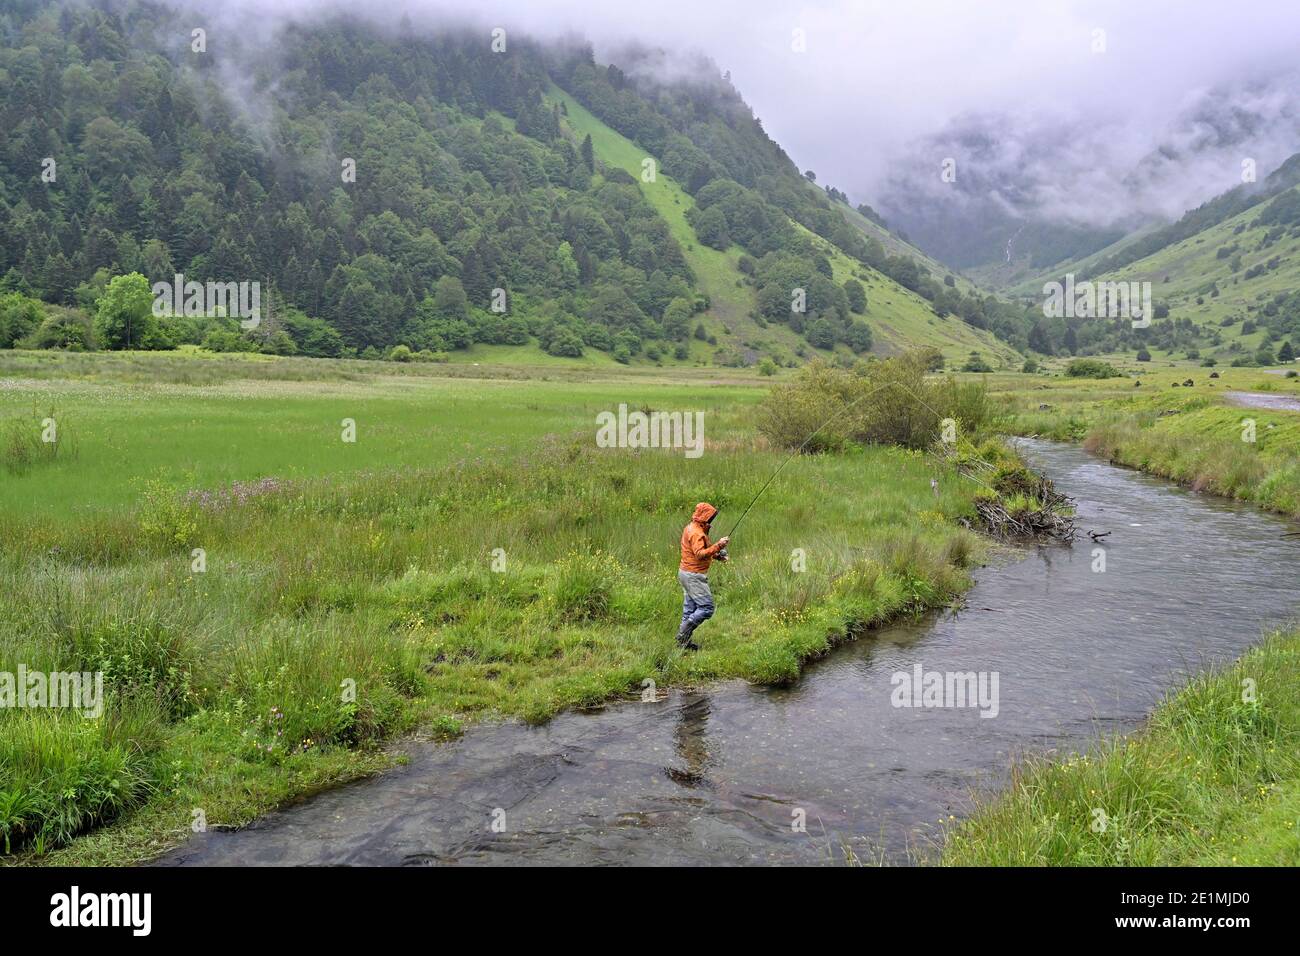 fly fisherman with an orange jacket fishing for trout in the mountains in rainy weather Stock Photo